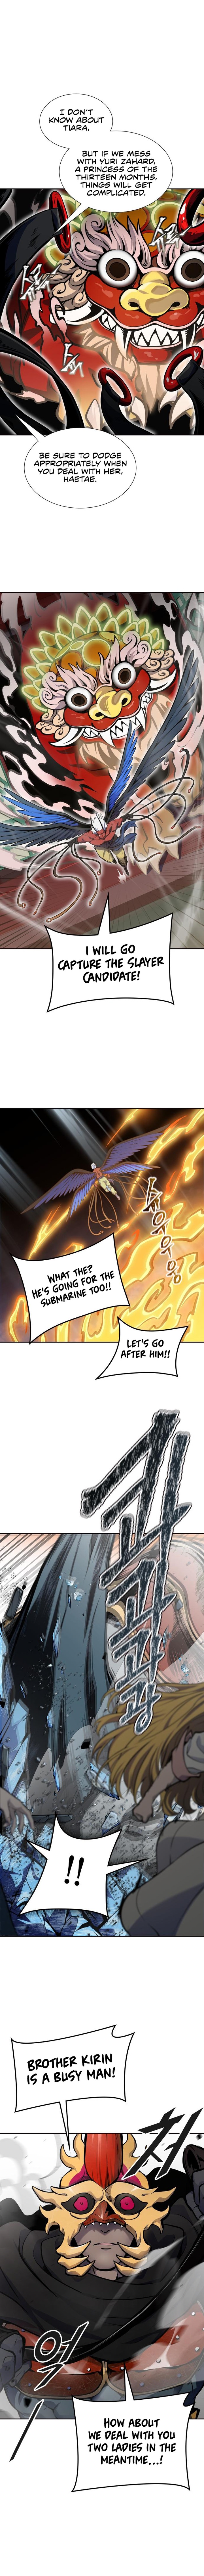 Tower Of God 591 6